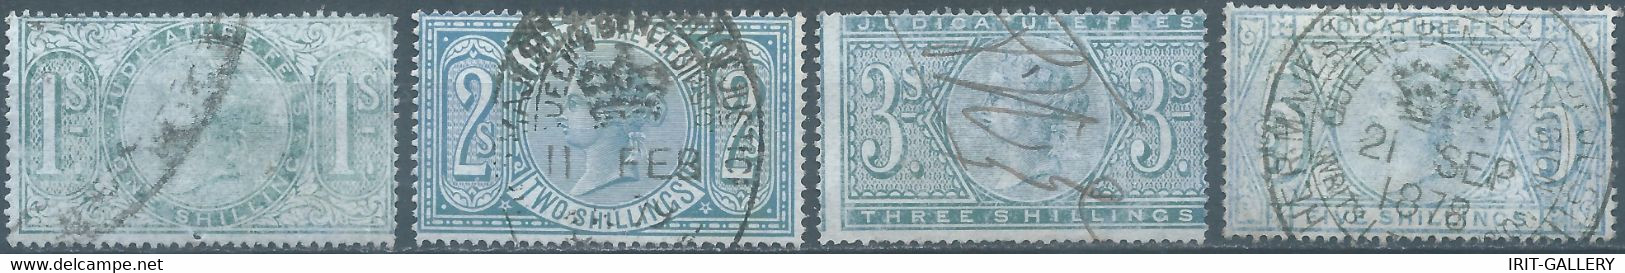 Great Britain-ENGLAND,Queen Victoria,1880-1900 Revenue Stamp Tax Fiscal,JUDICATURE FEES,1-2-3-5 Shillings,Used - Fiscale Zegels